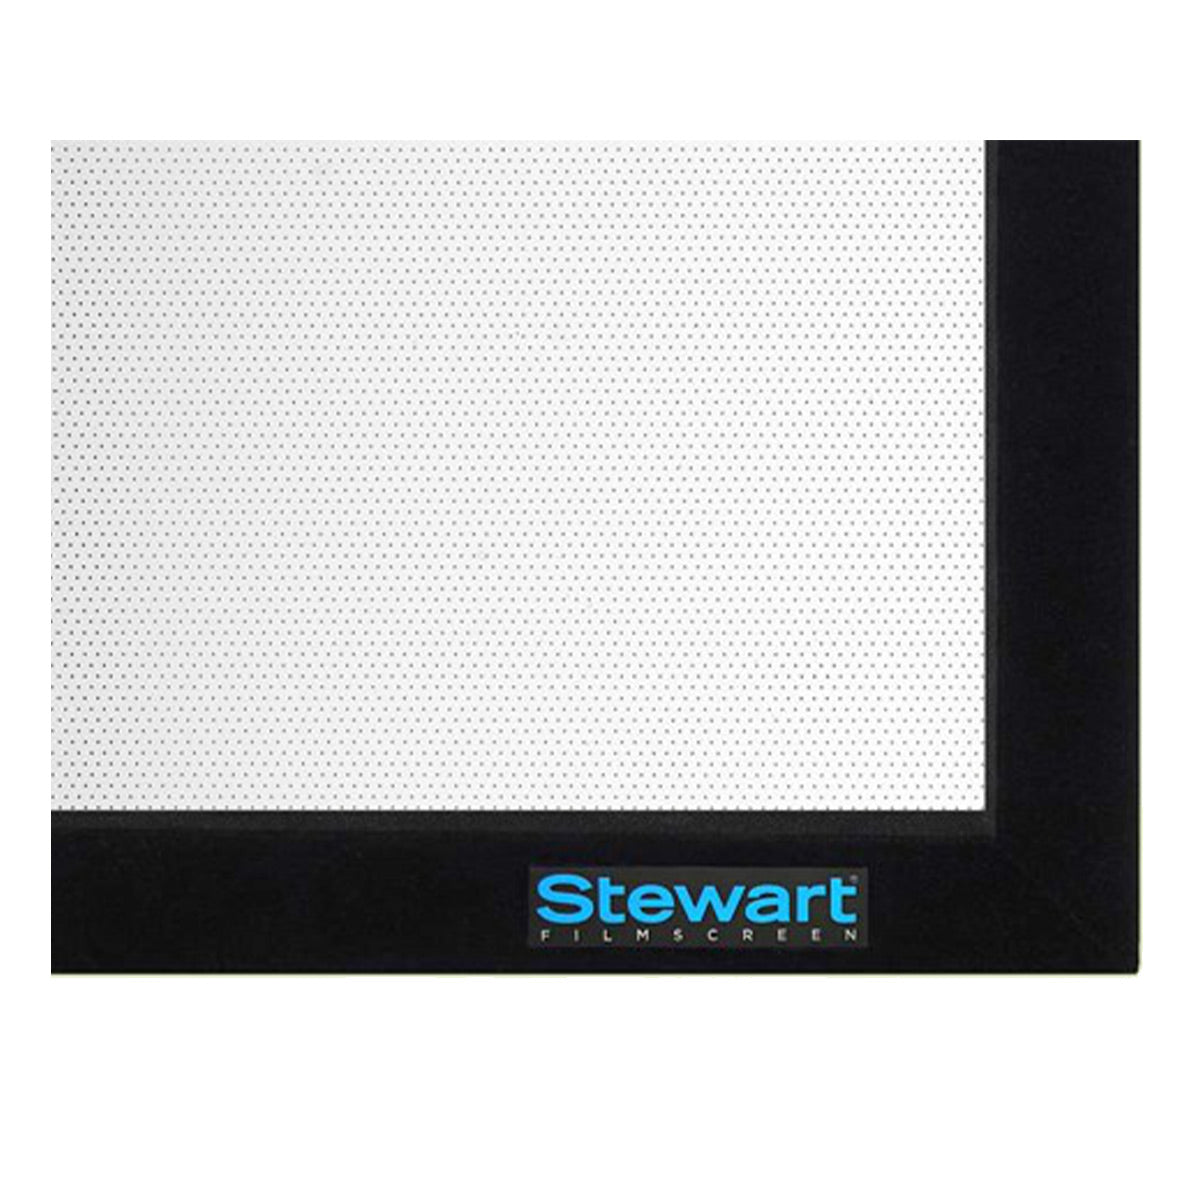 Stewart WallScreen Deluxe 120" HDTV Projector Screen with 3.25" Fixed Frame, 1.3 Peak Gain Material, Quick Snap System, and EZ Mount Bracket (StudioTek 130 G4)